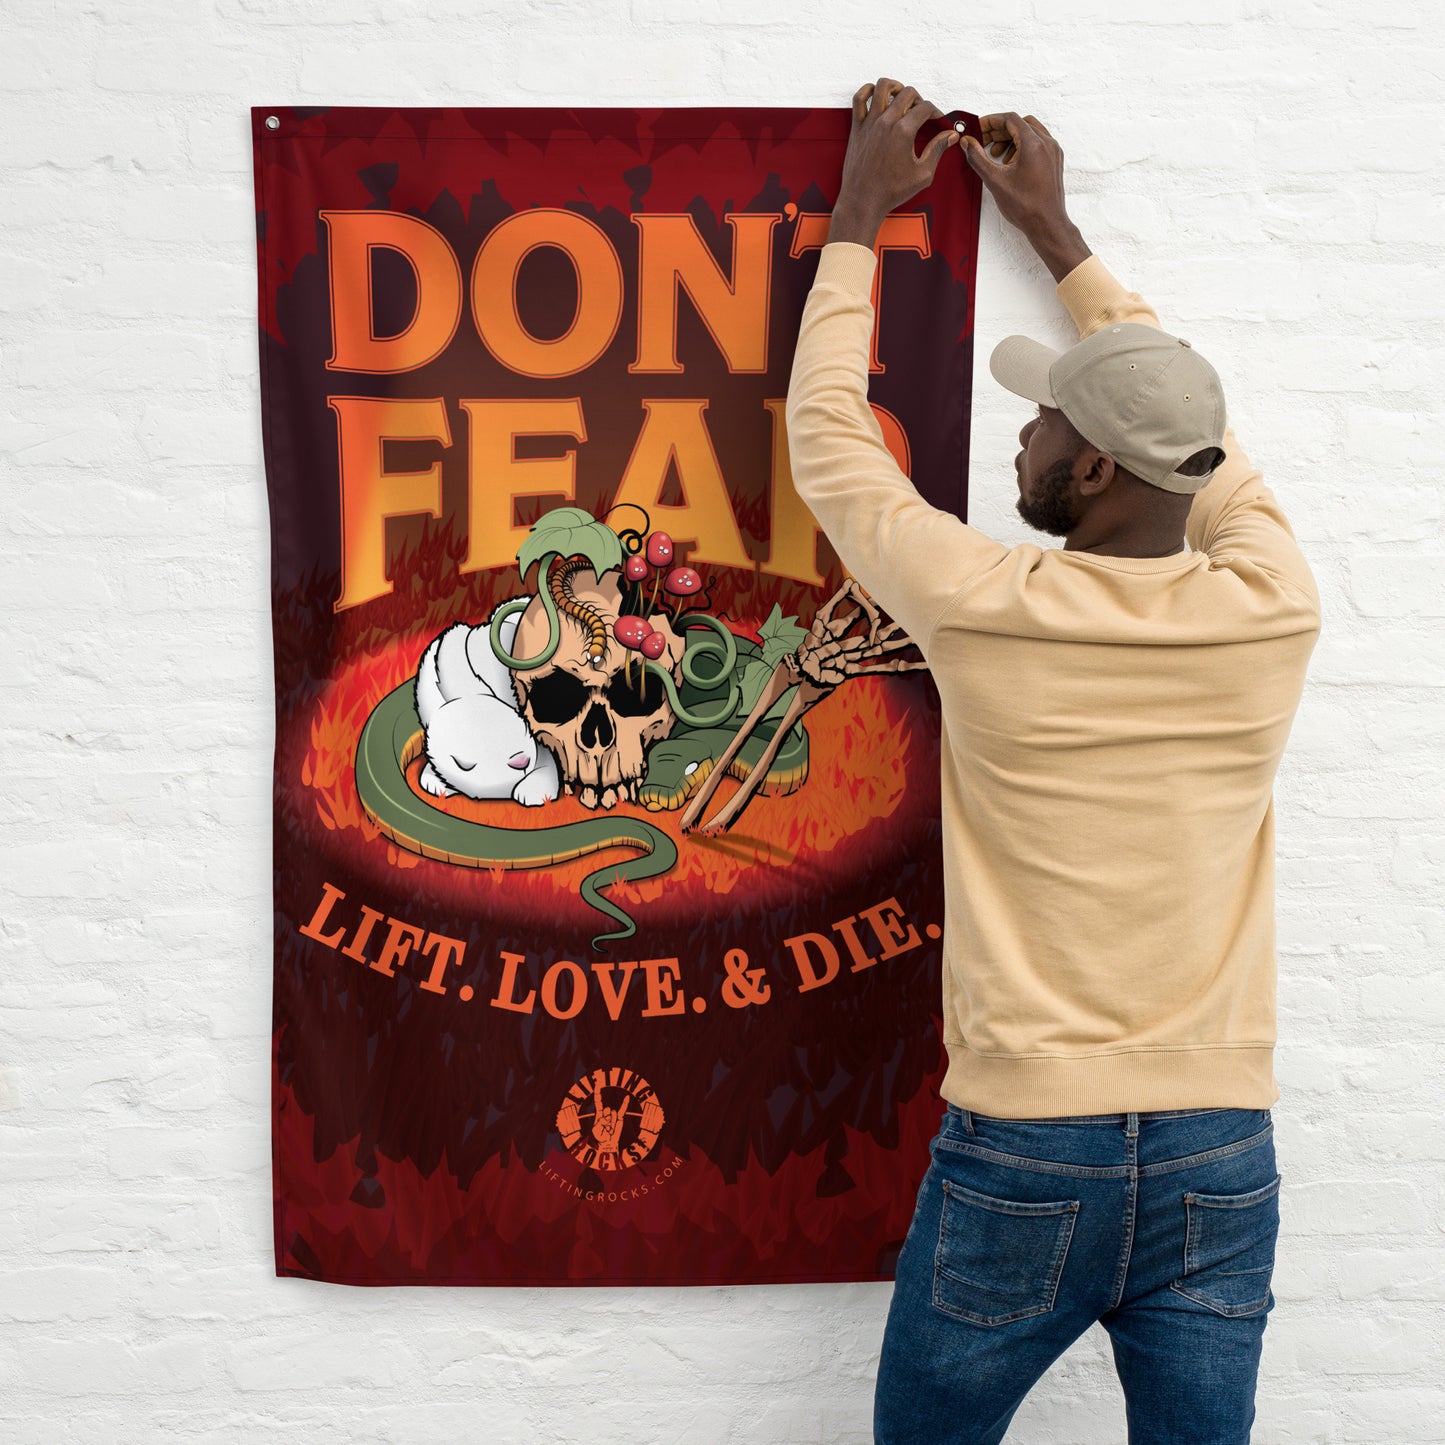 New and updated "Don't Fear" 3'x5' Tall Bad Ass Gym Flag.